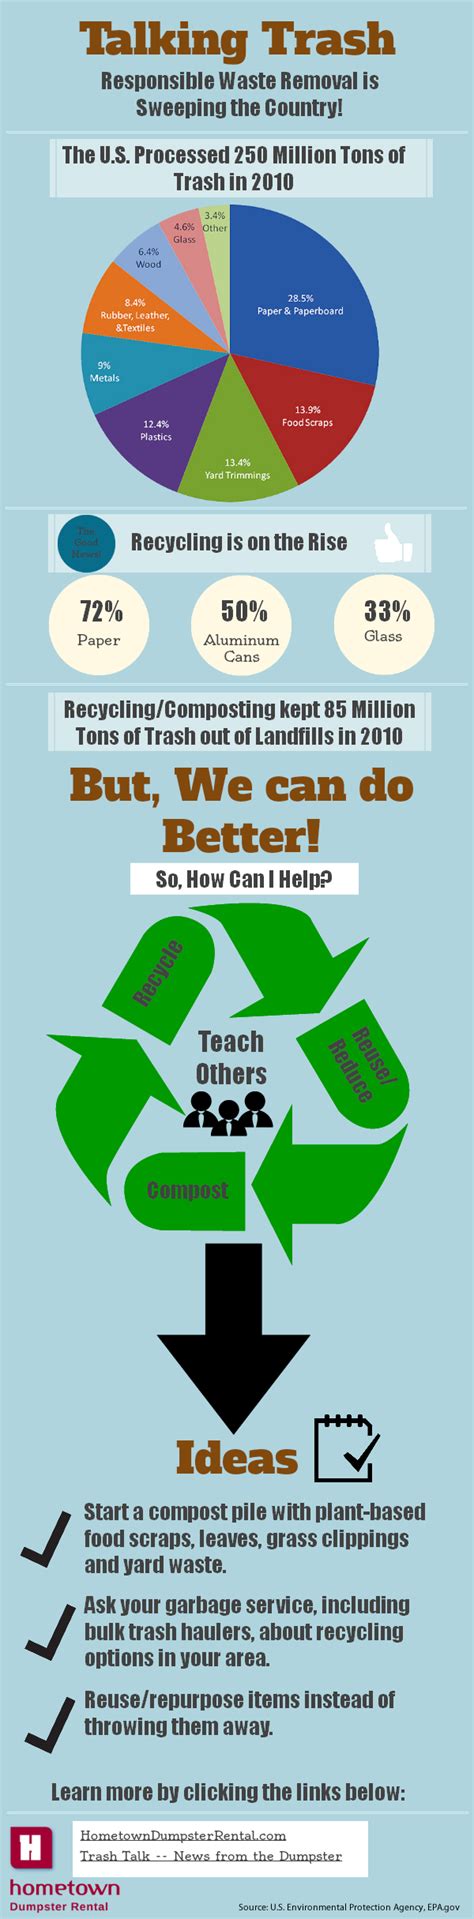 Talking Trash Infographic Recycling And Waste Management Efforts In